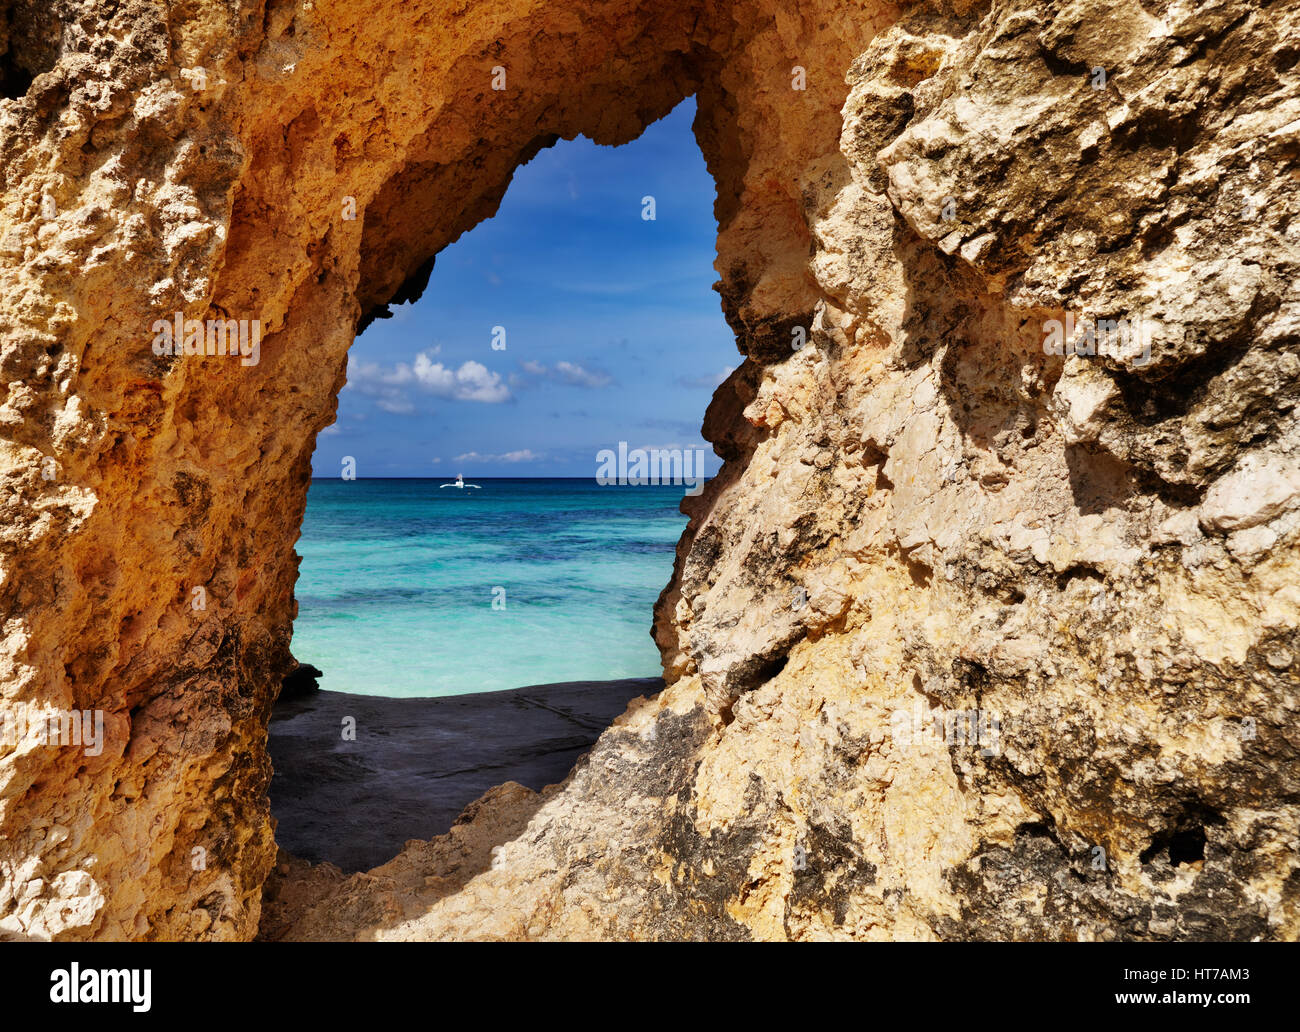 Tropical beach, view through a hole in the rock, Boracay island, Philippines Stock Photo